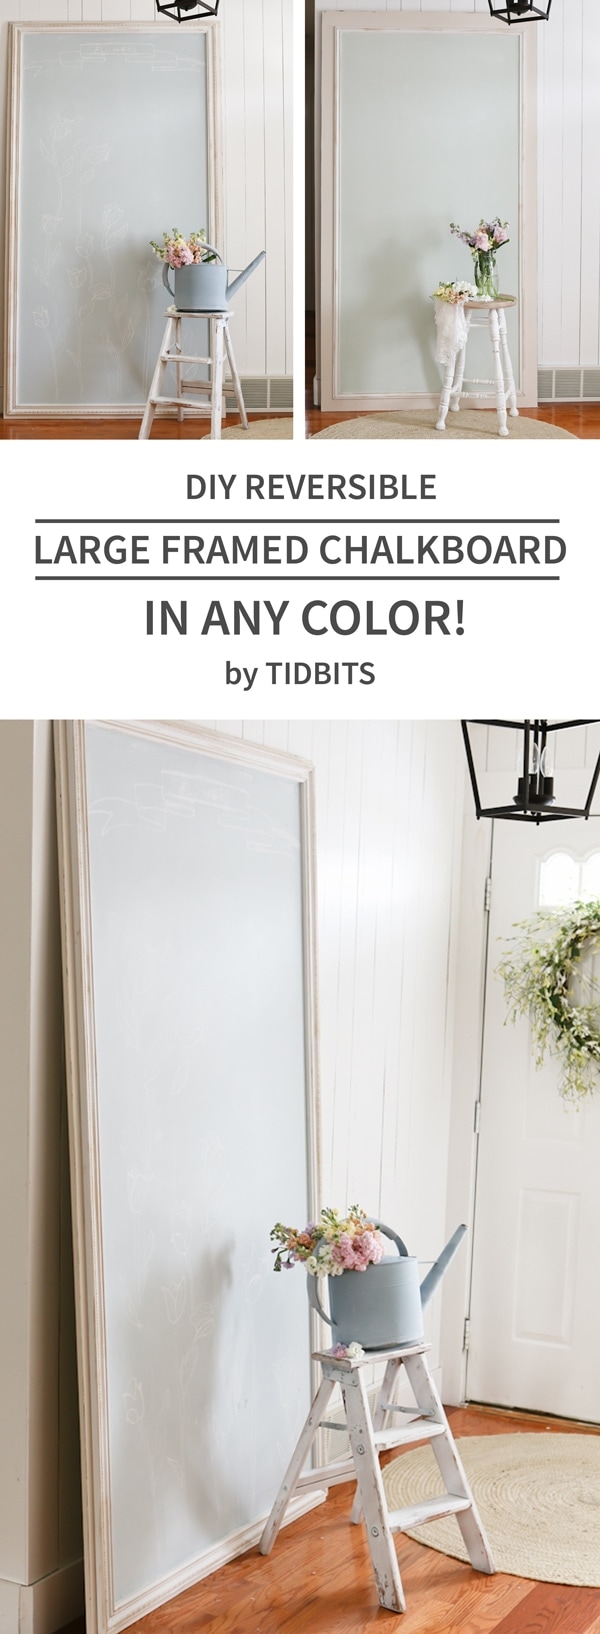 DIY reversible large framed chalkboard + learn how to make chalkboard paint in any color!